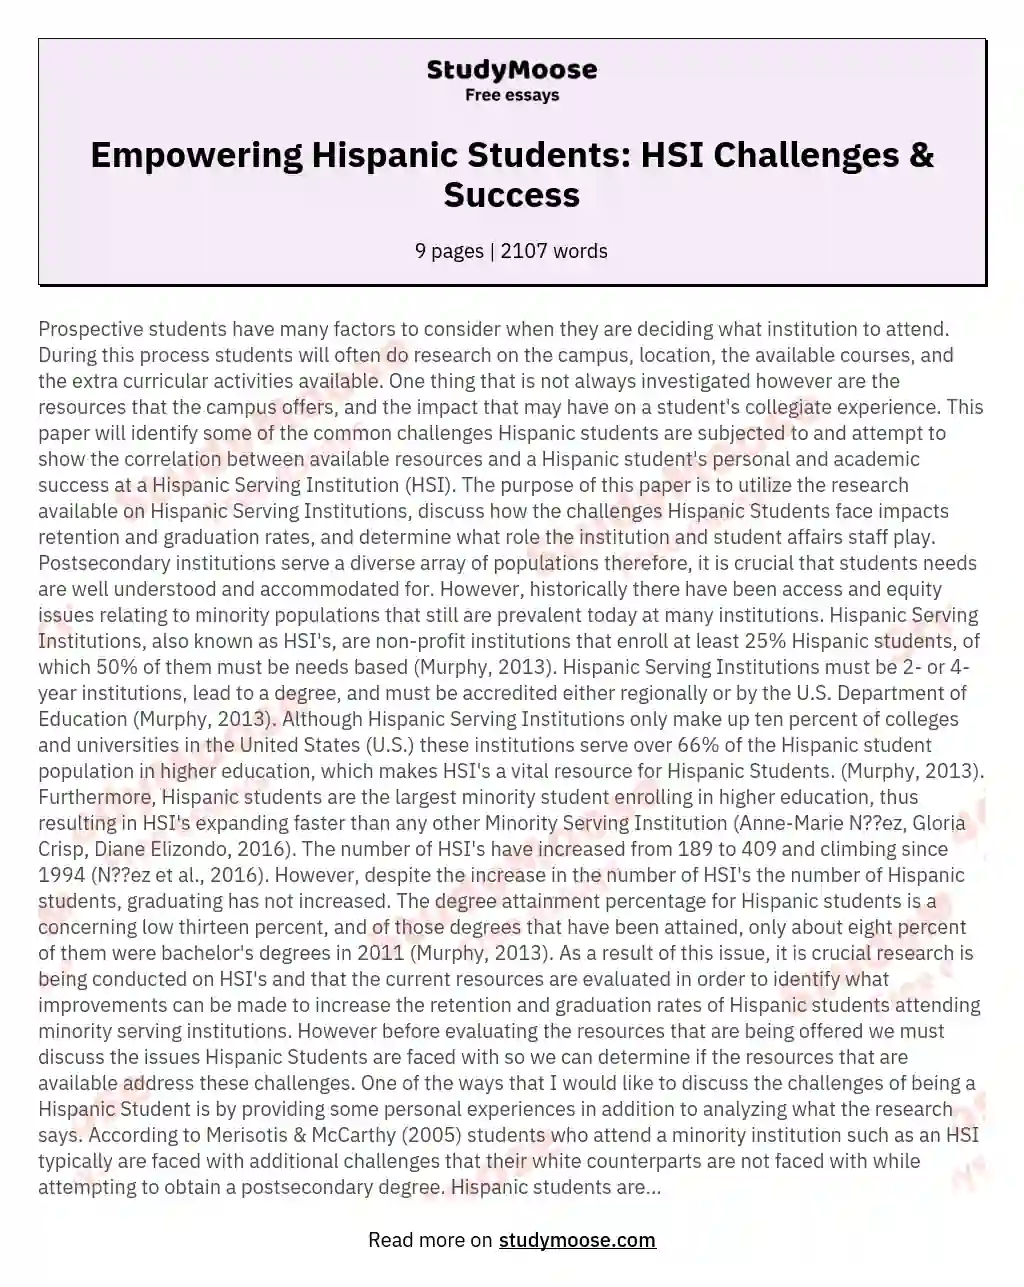 Empowering Hispanic Students: HSI Challenges & Success essay